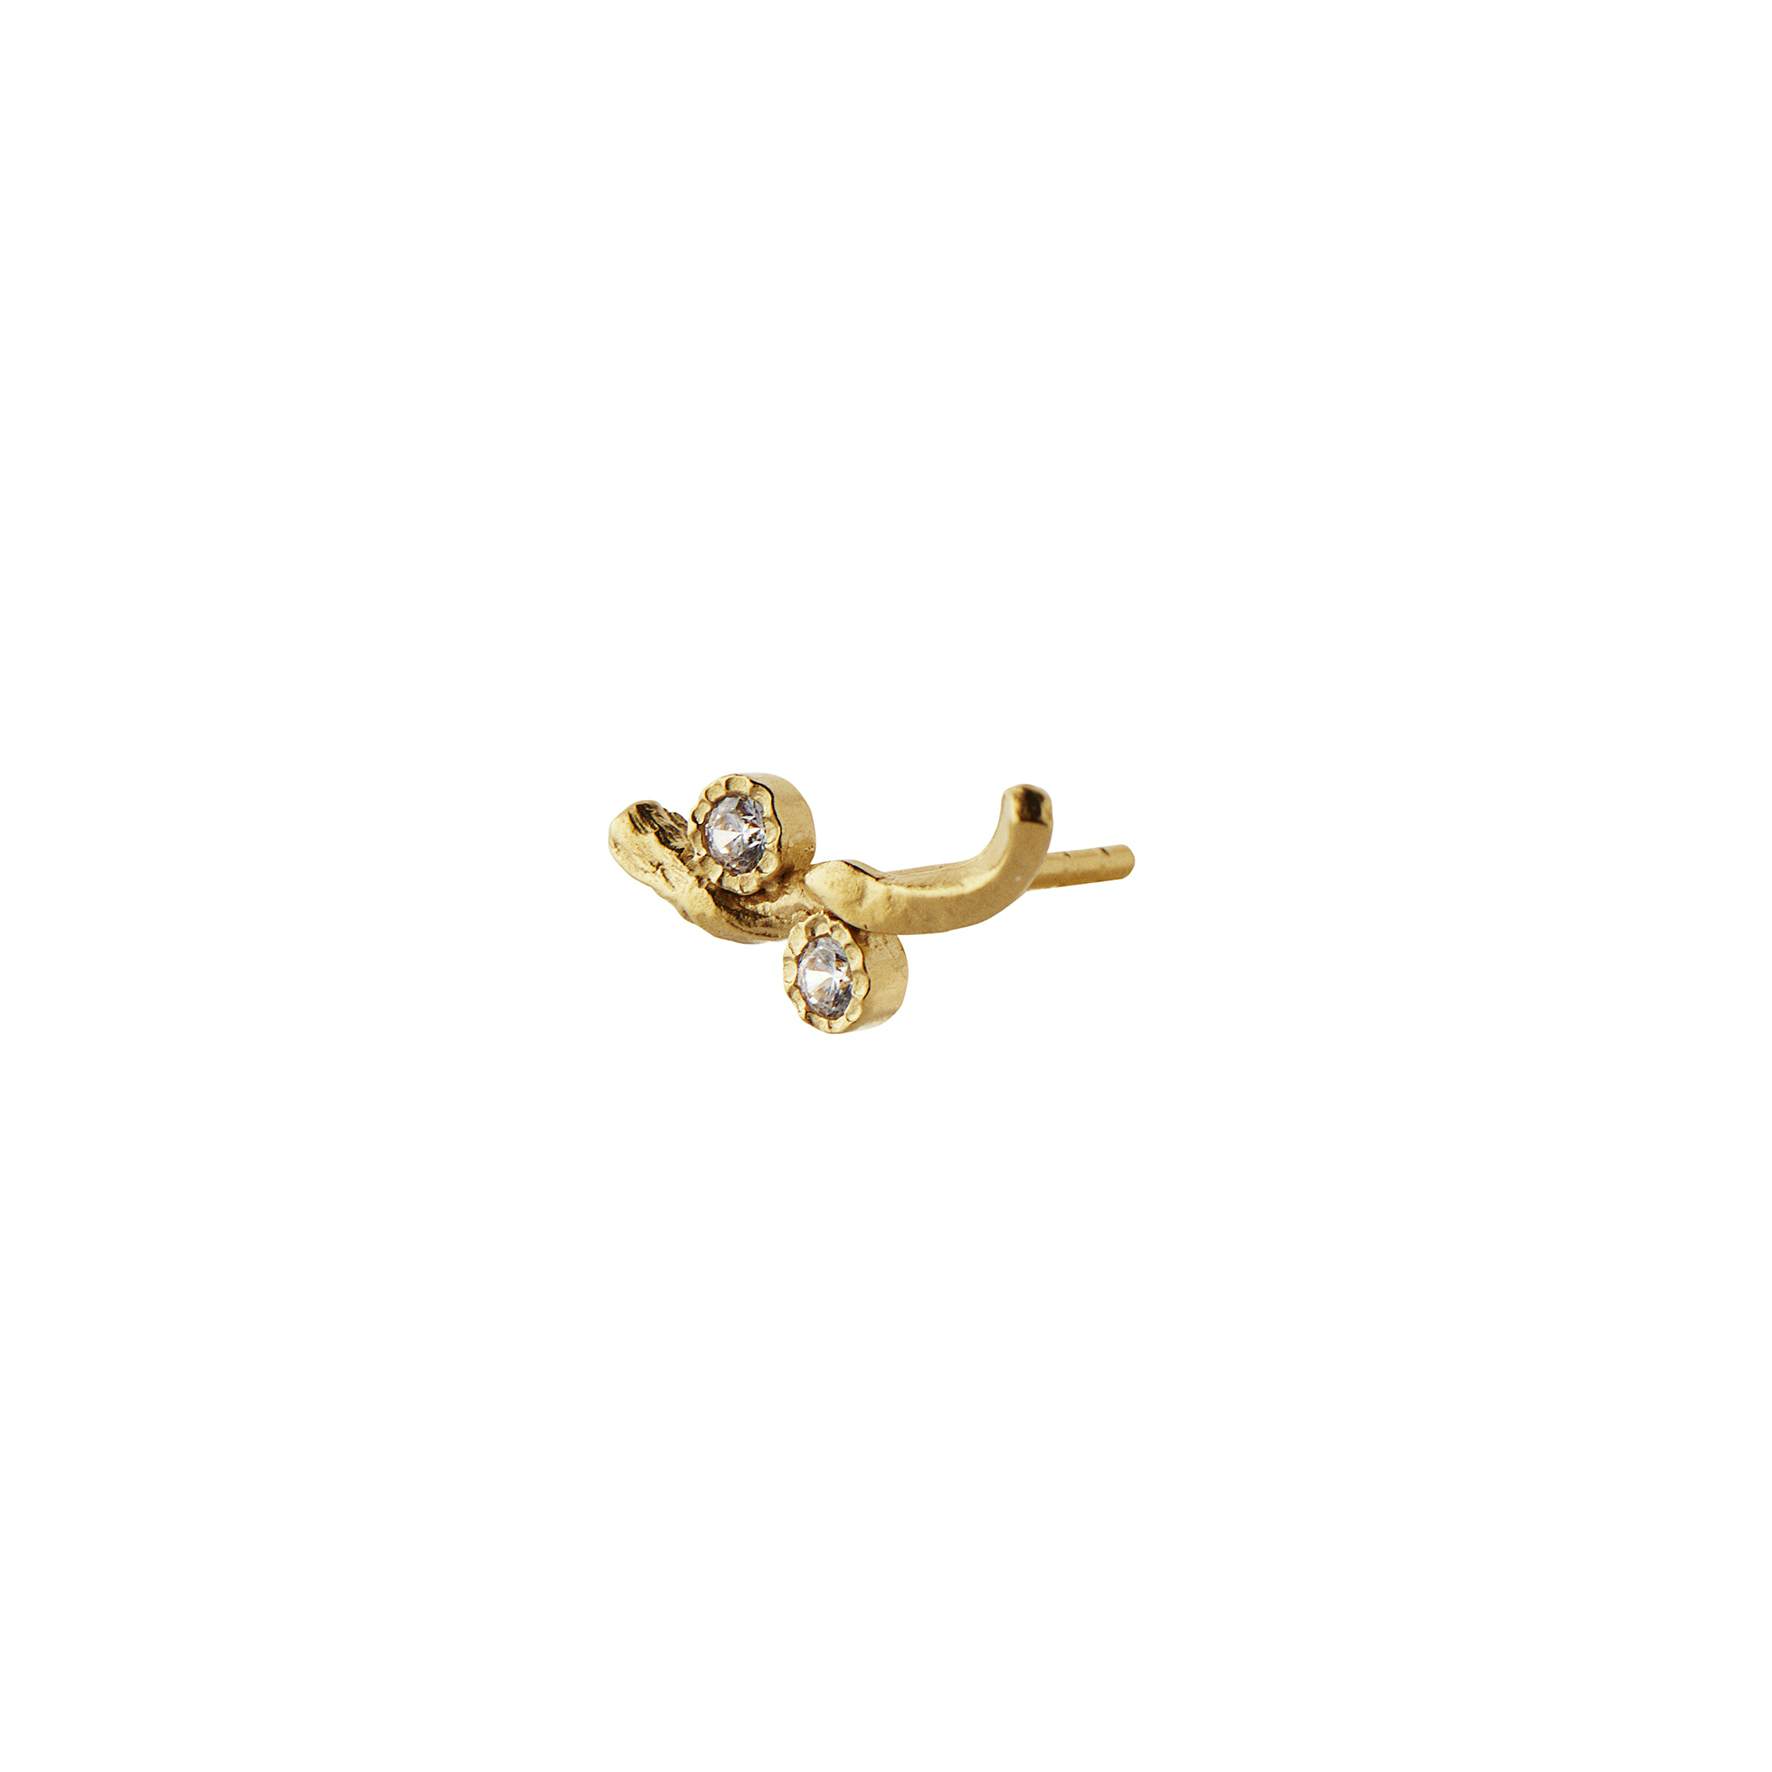 Flow Earring With Two Stones from STINE A Jewelry in Goldplated-Silver Sterling 925